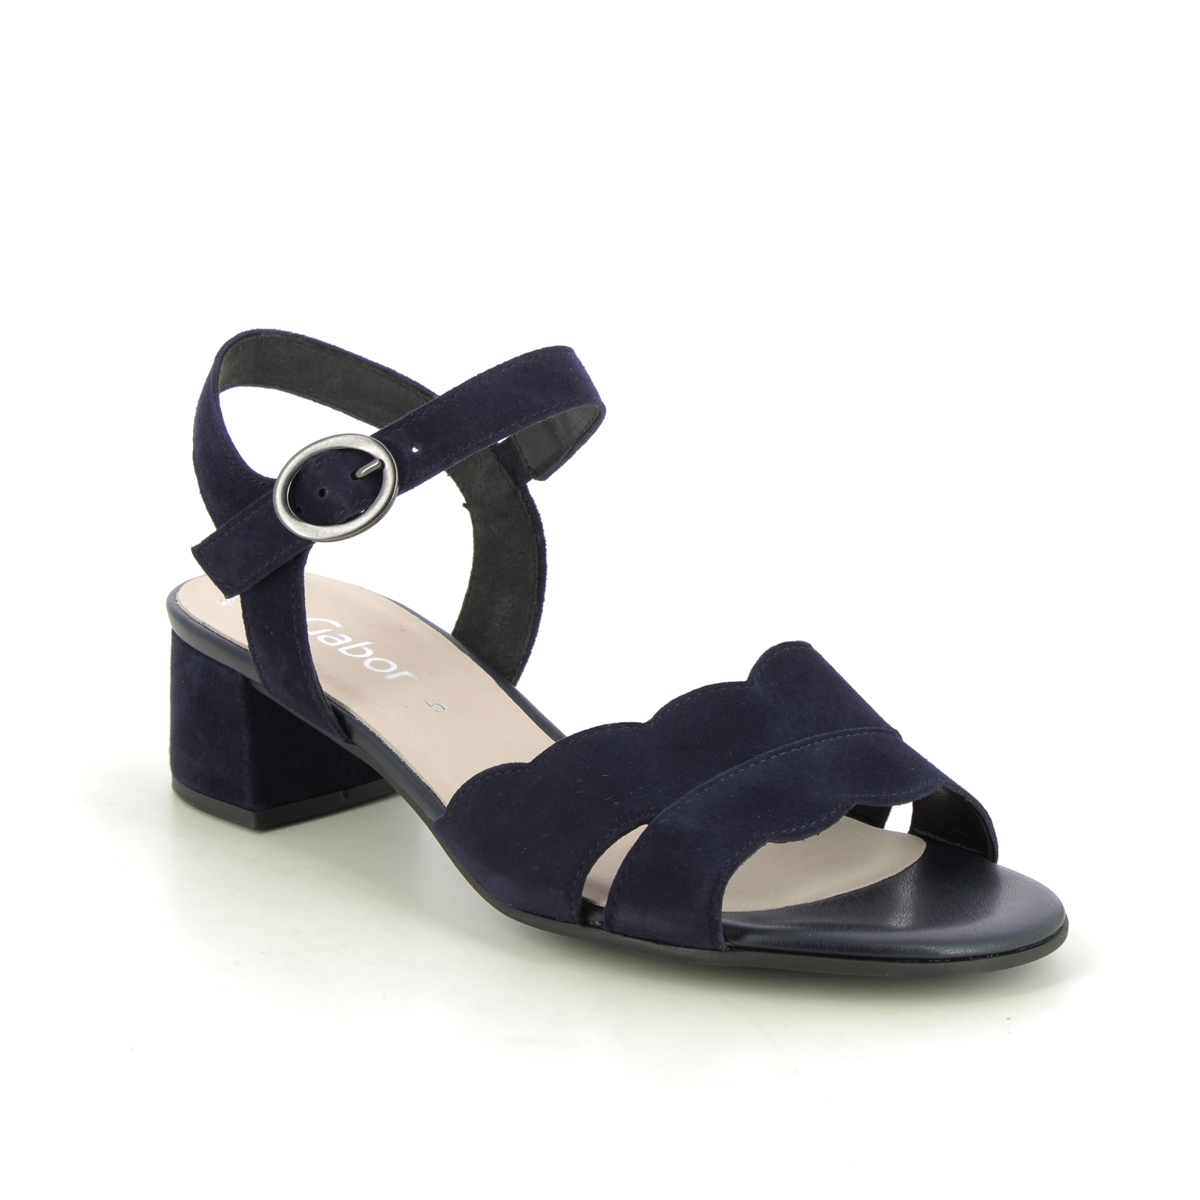 Gabor Bijou Jamma Navy Suede Womens Heeled Sandals 41.770.16 in a Plain Leather in Size 5.5